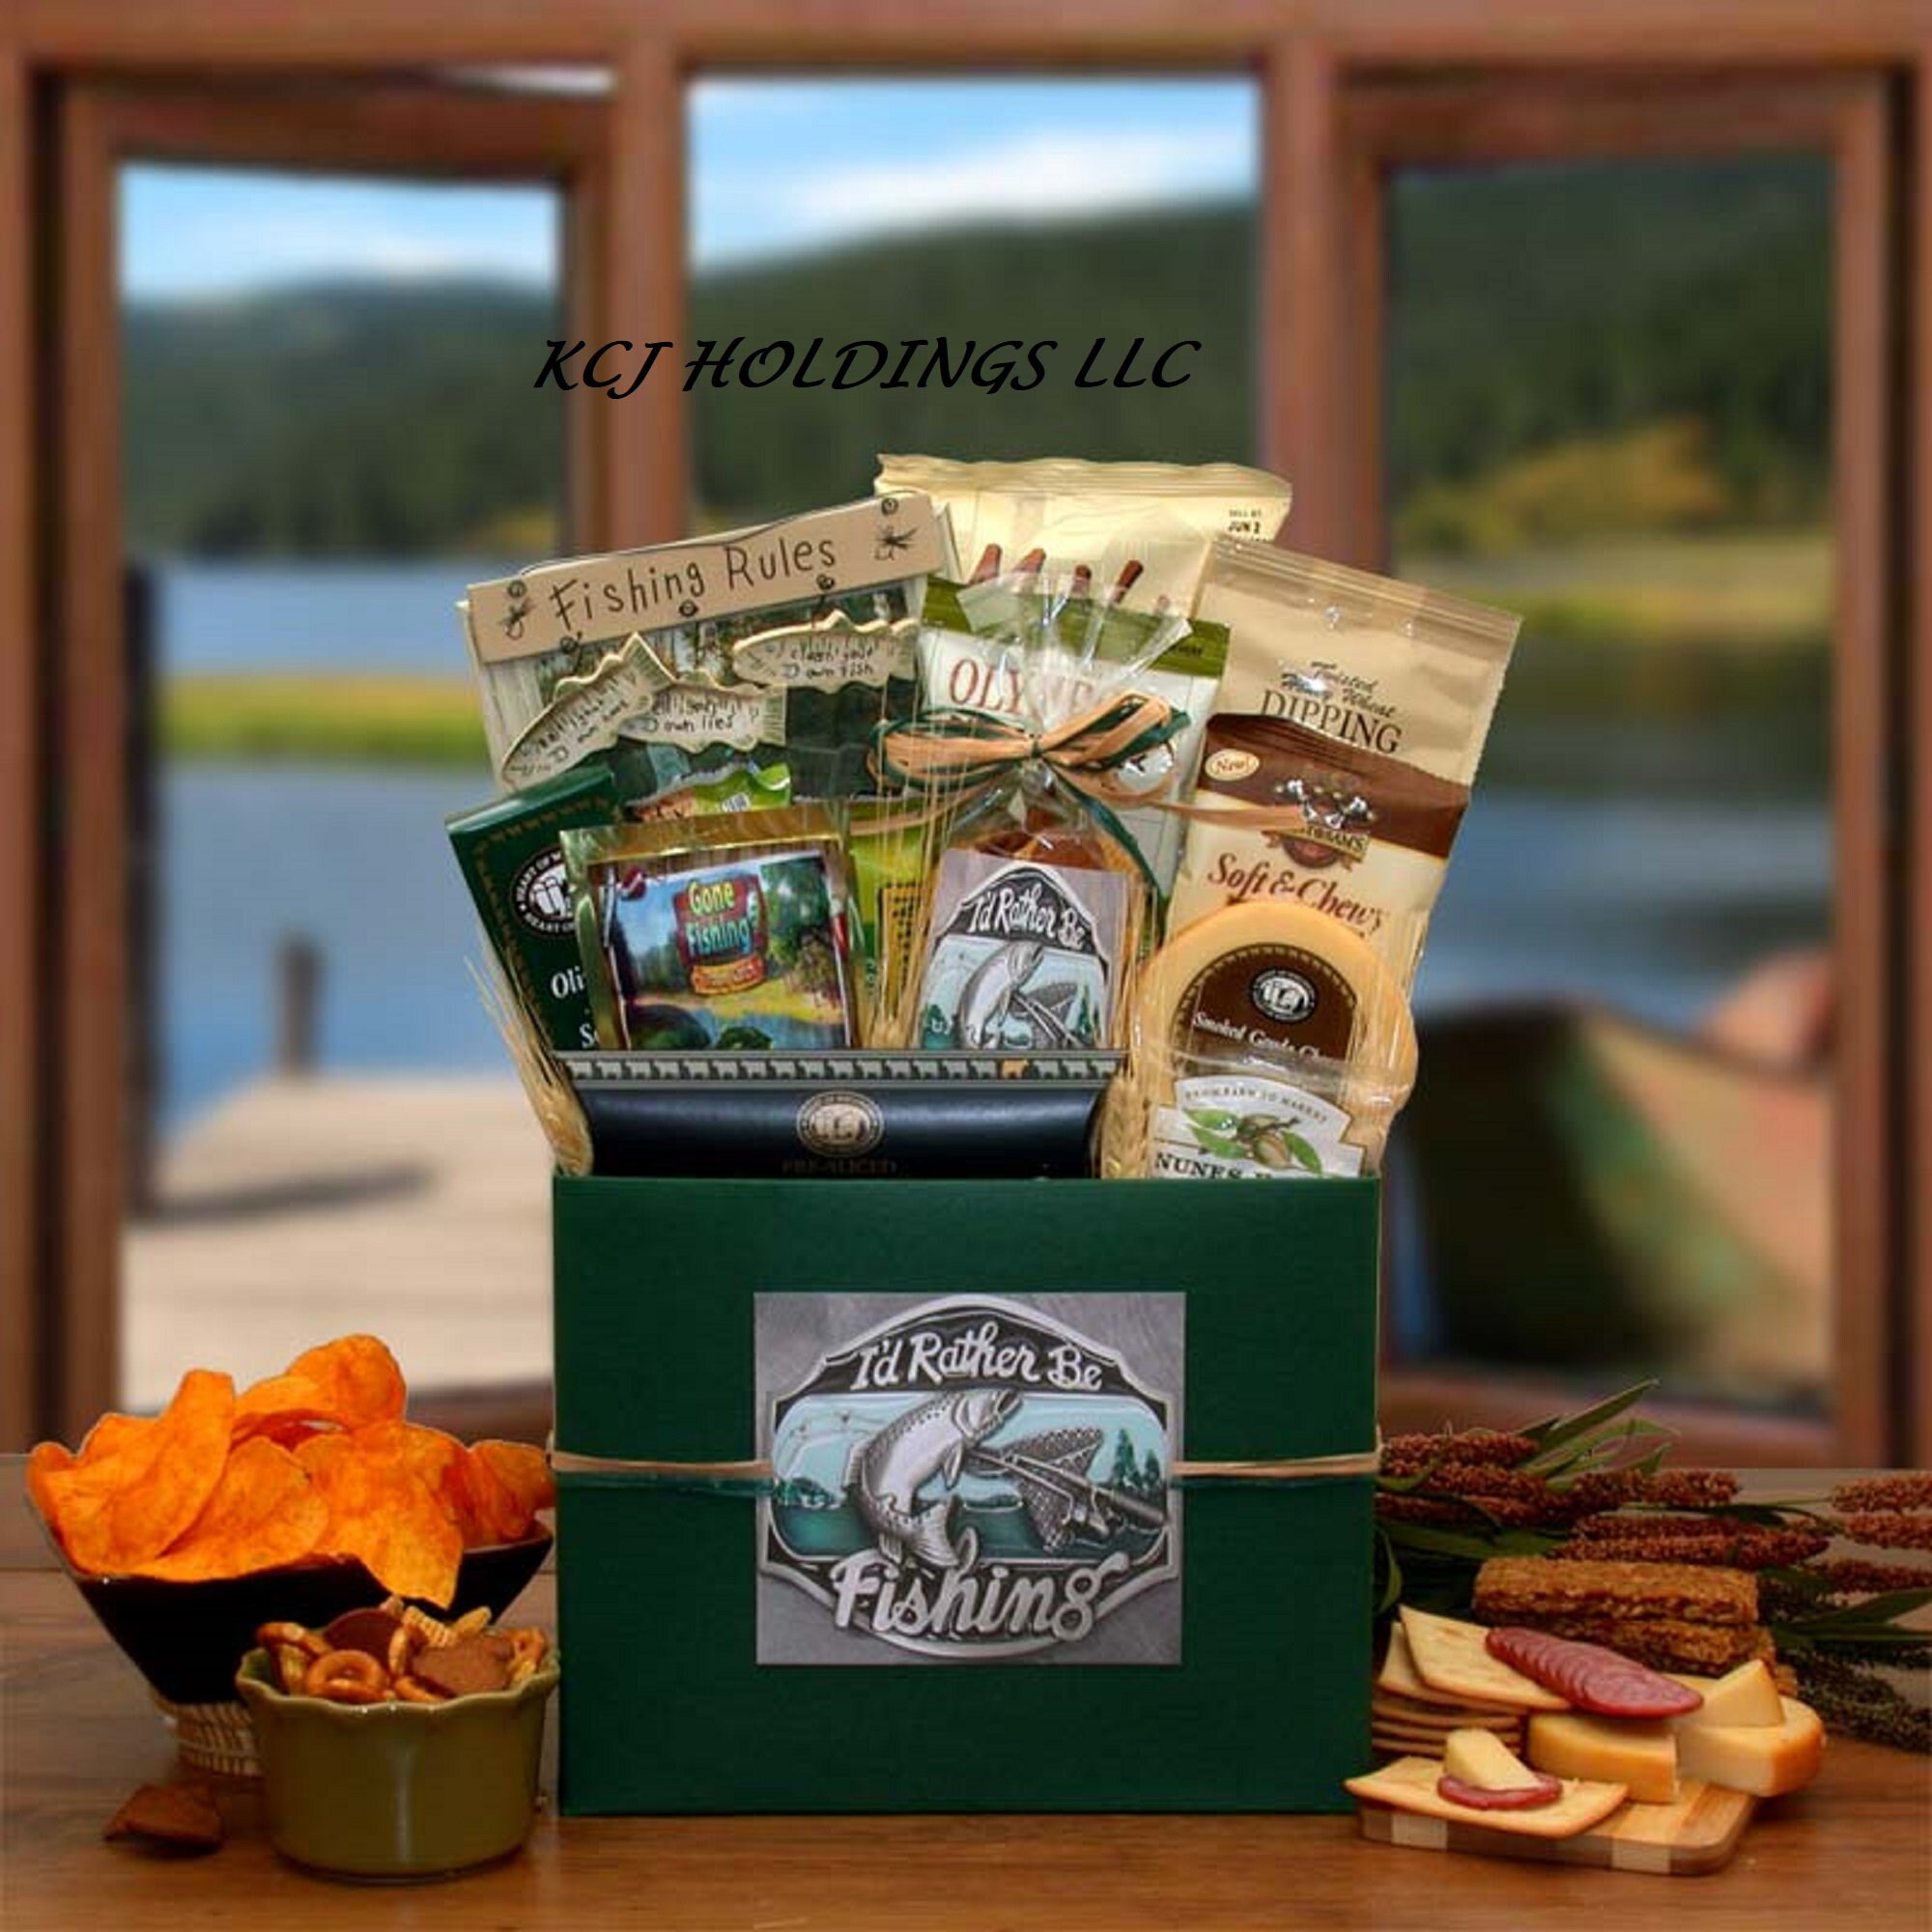 I'd Rather Be Fishing Gift Box Gift Basket for Him Birthday